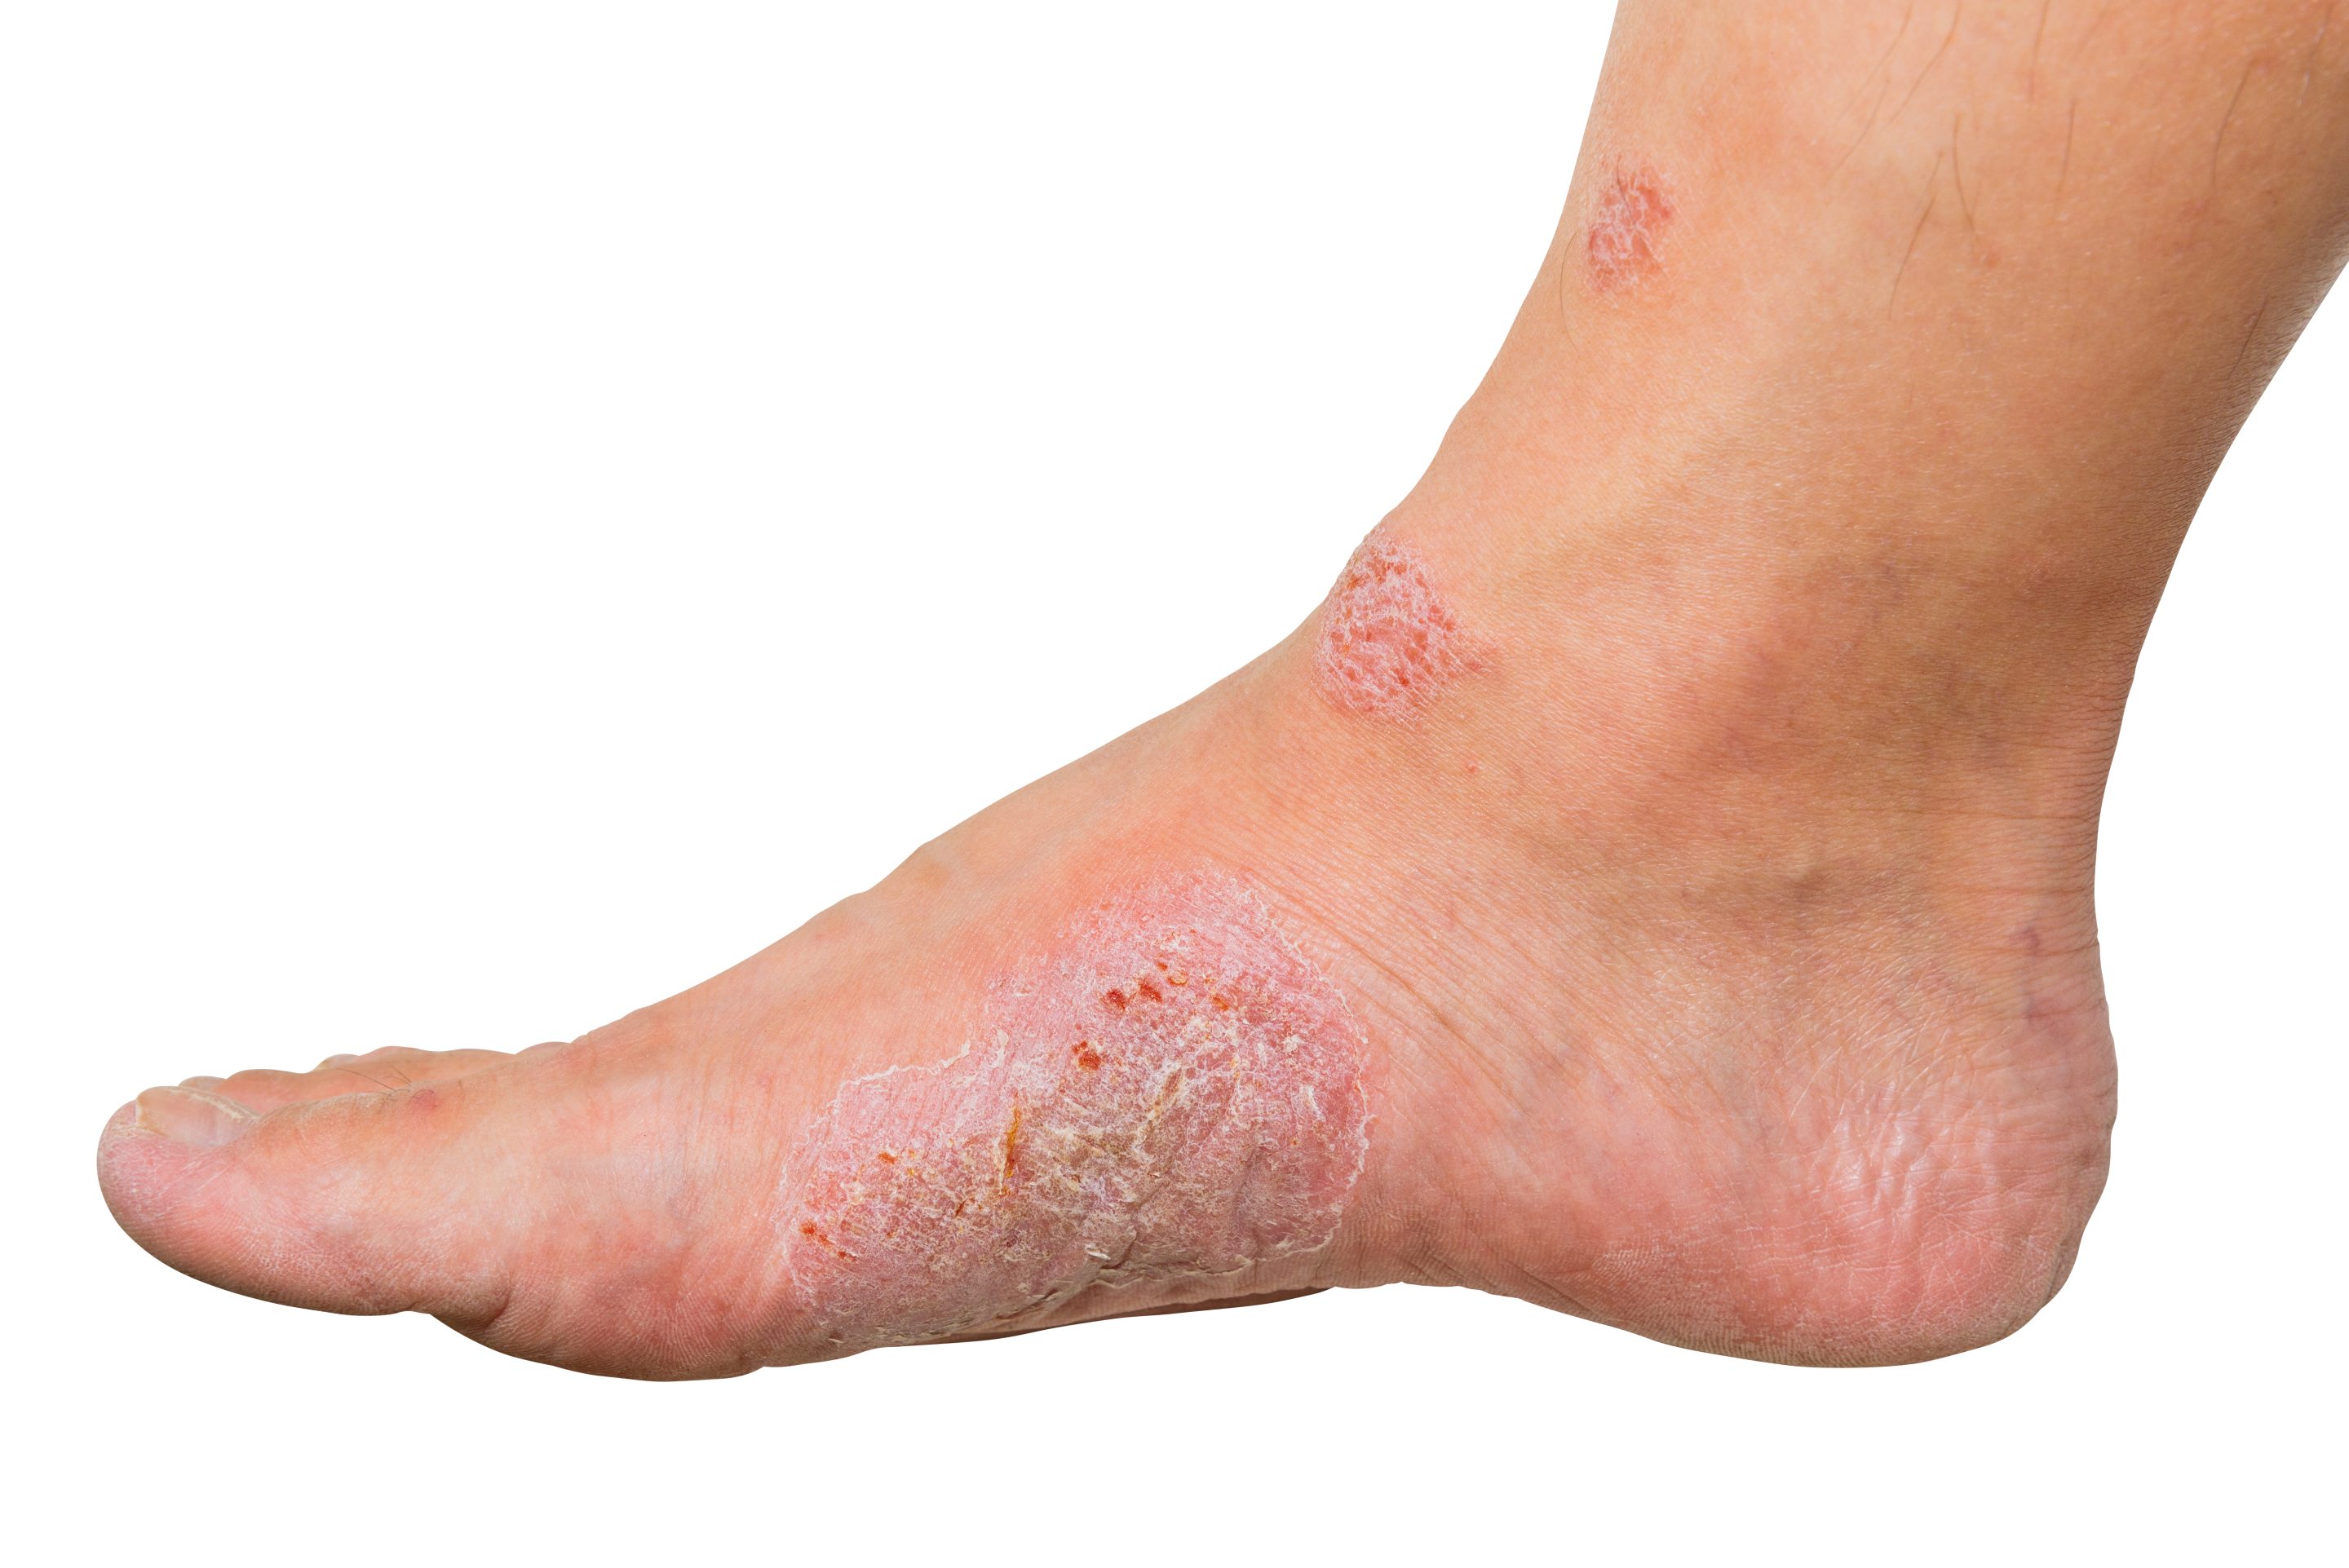 Reporting Diabetic Blisters on Your Claims